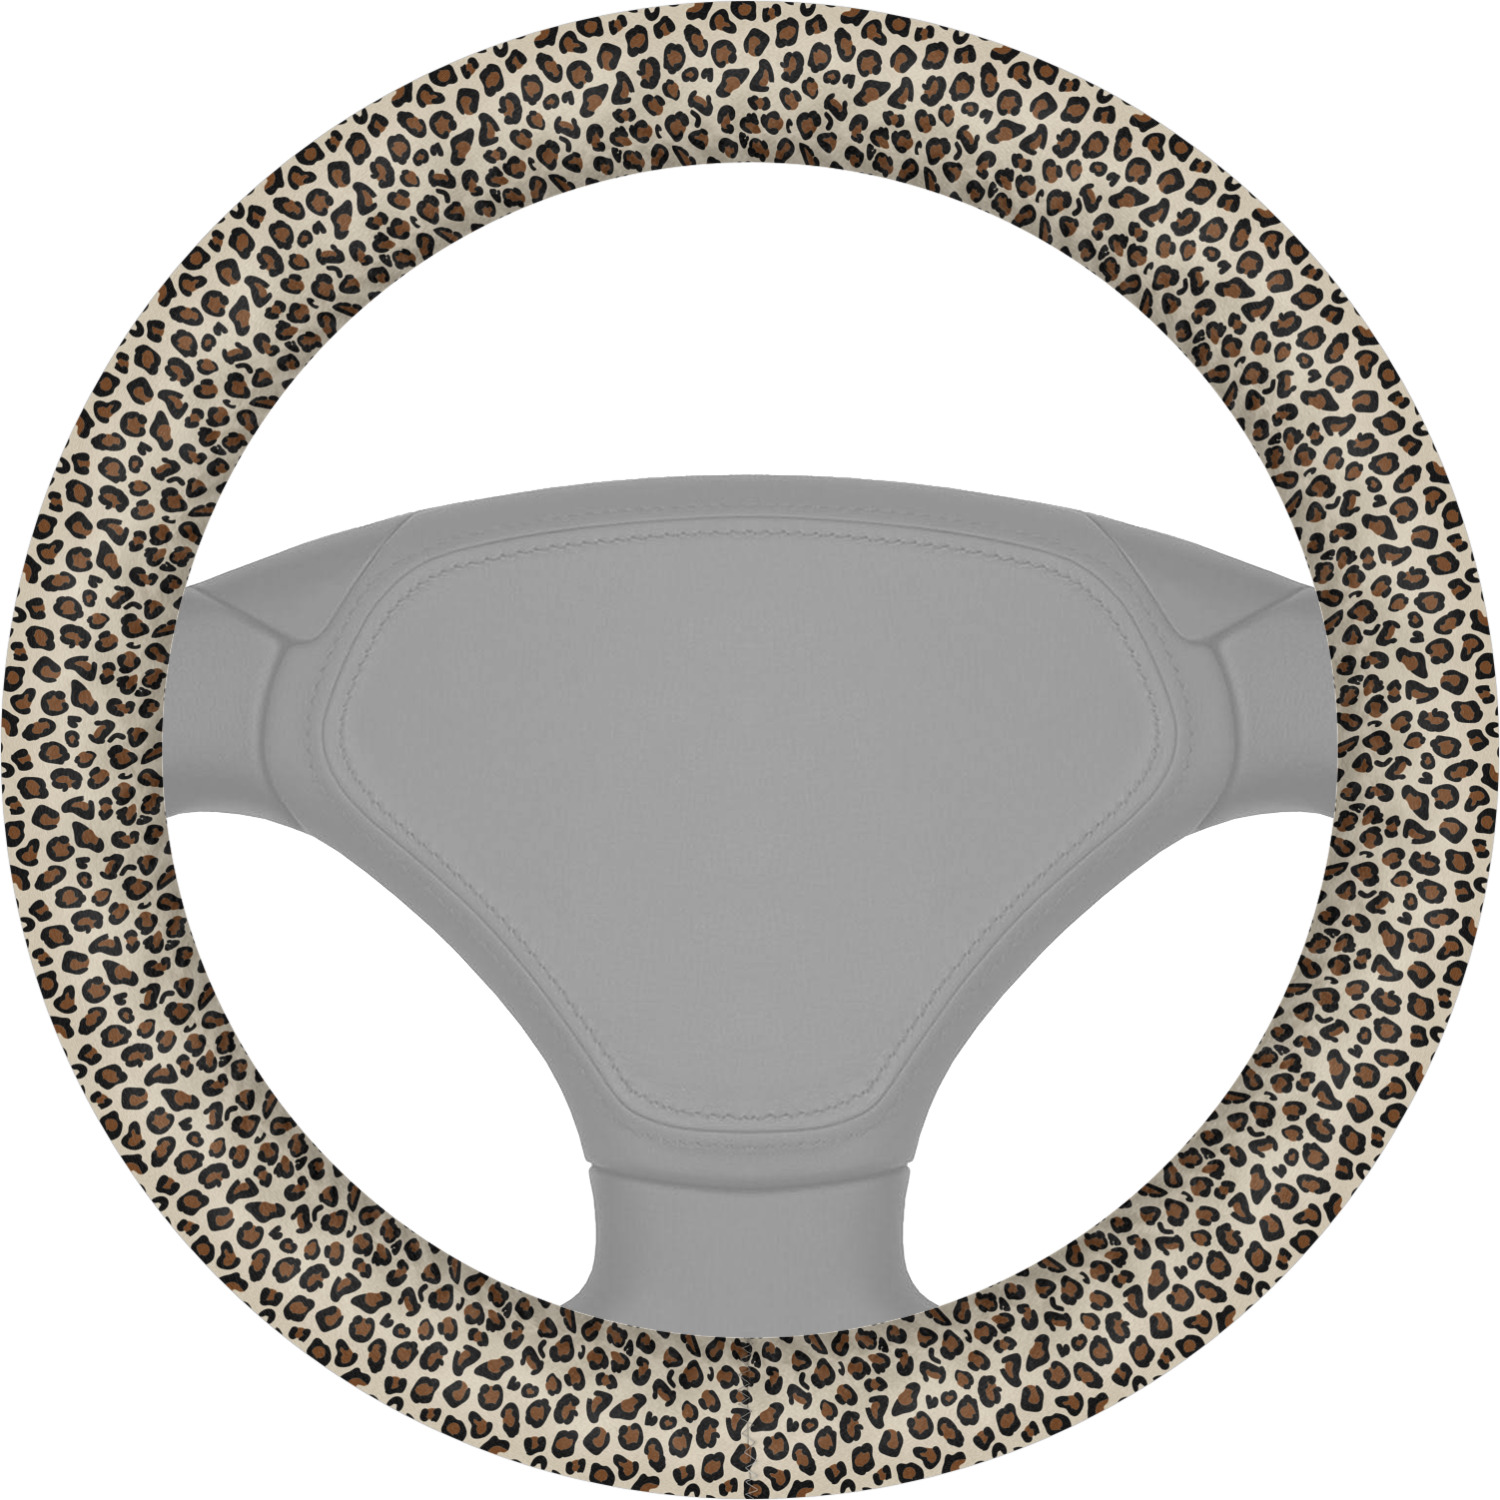 Leopard Print Steering Wheel Cover (Personalized) - YouCustomizeIt